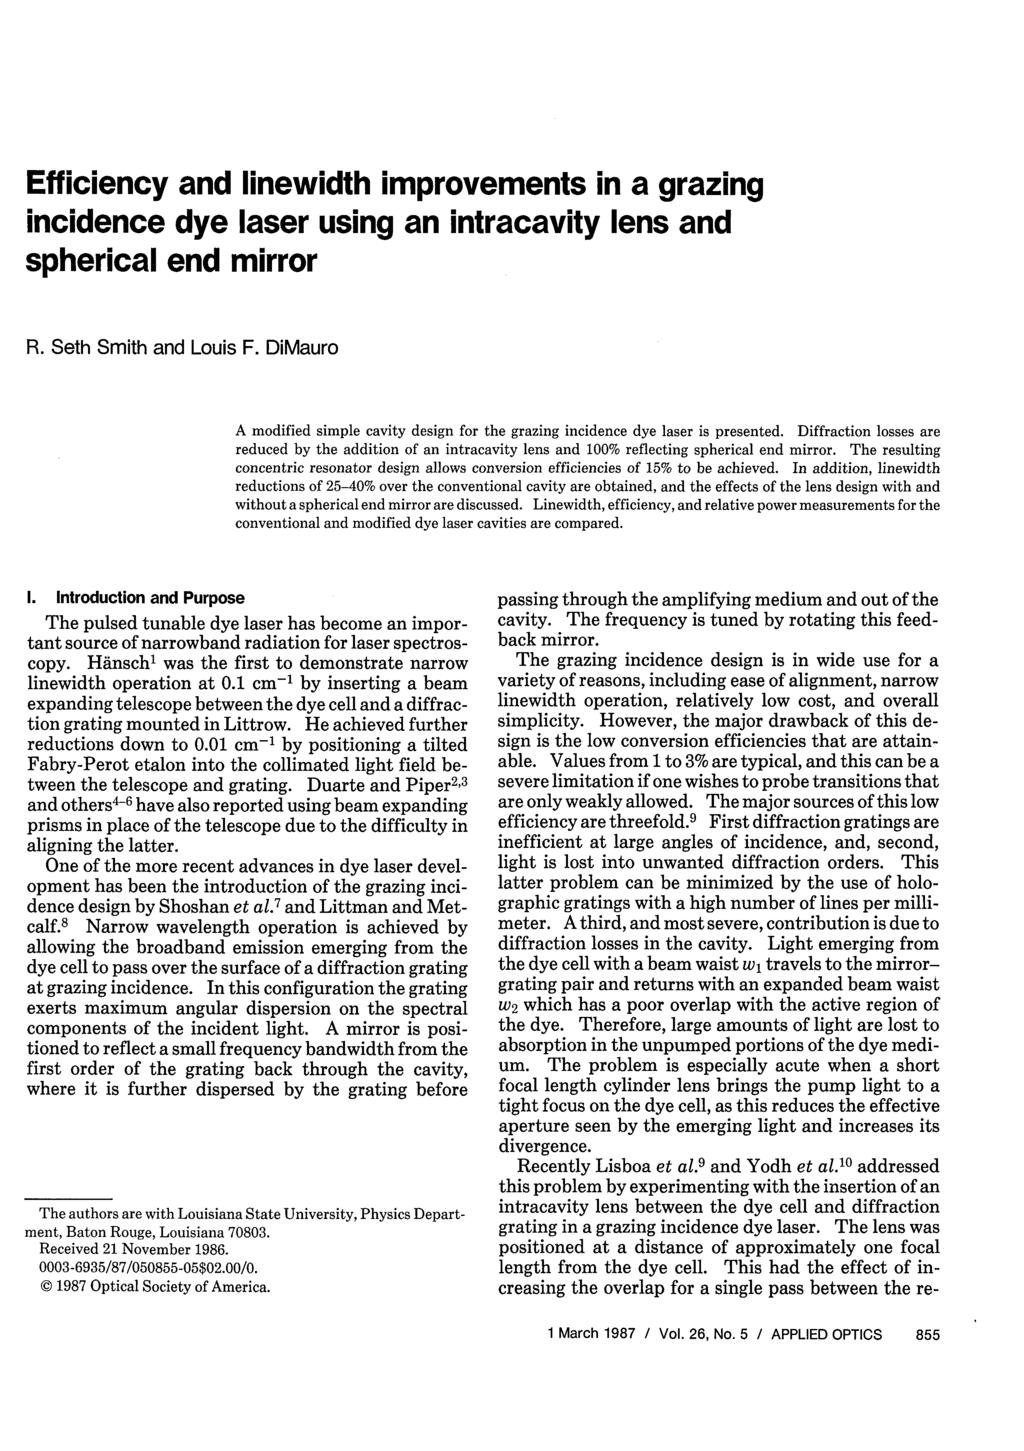 Efficiency and linewidth improvements in a grazing incidence dye laser using an intracavity lens and spherical end mirror R. Seth Smith and Louis F.